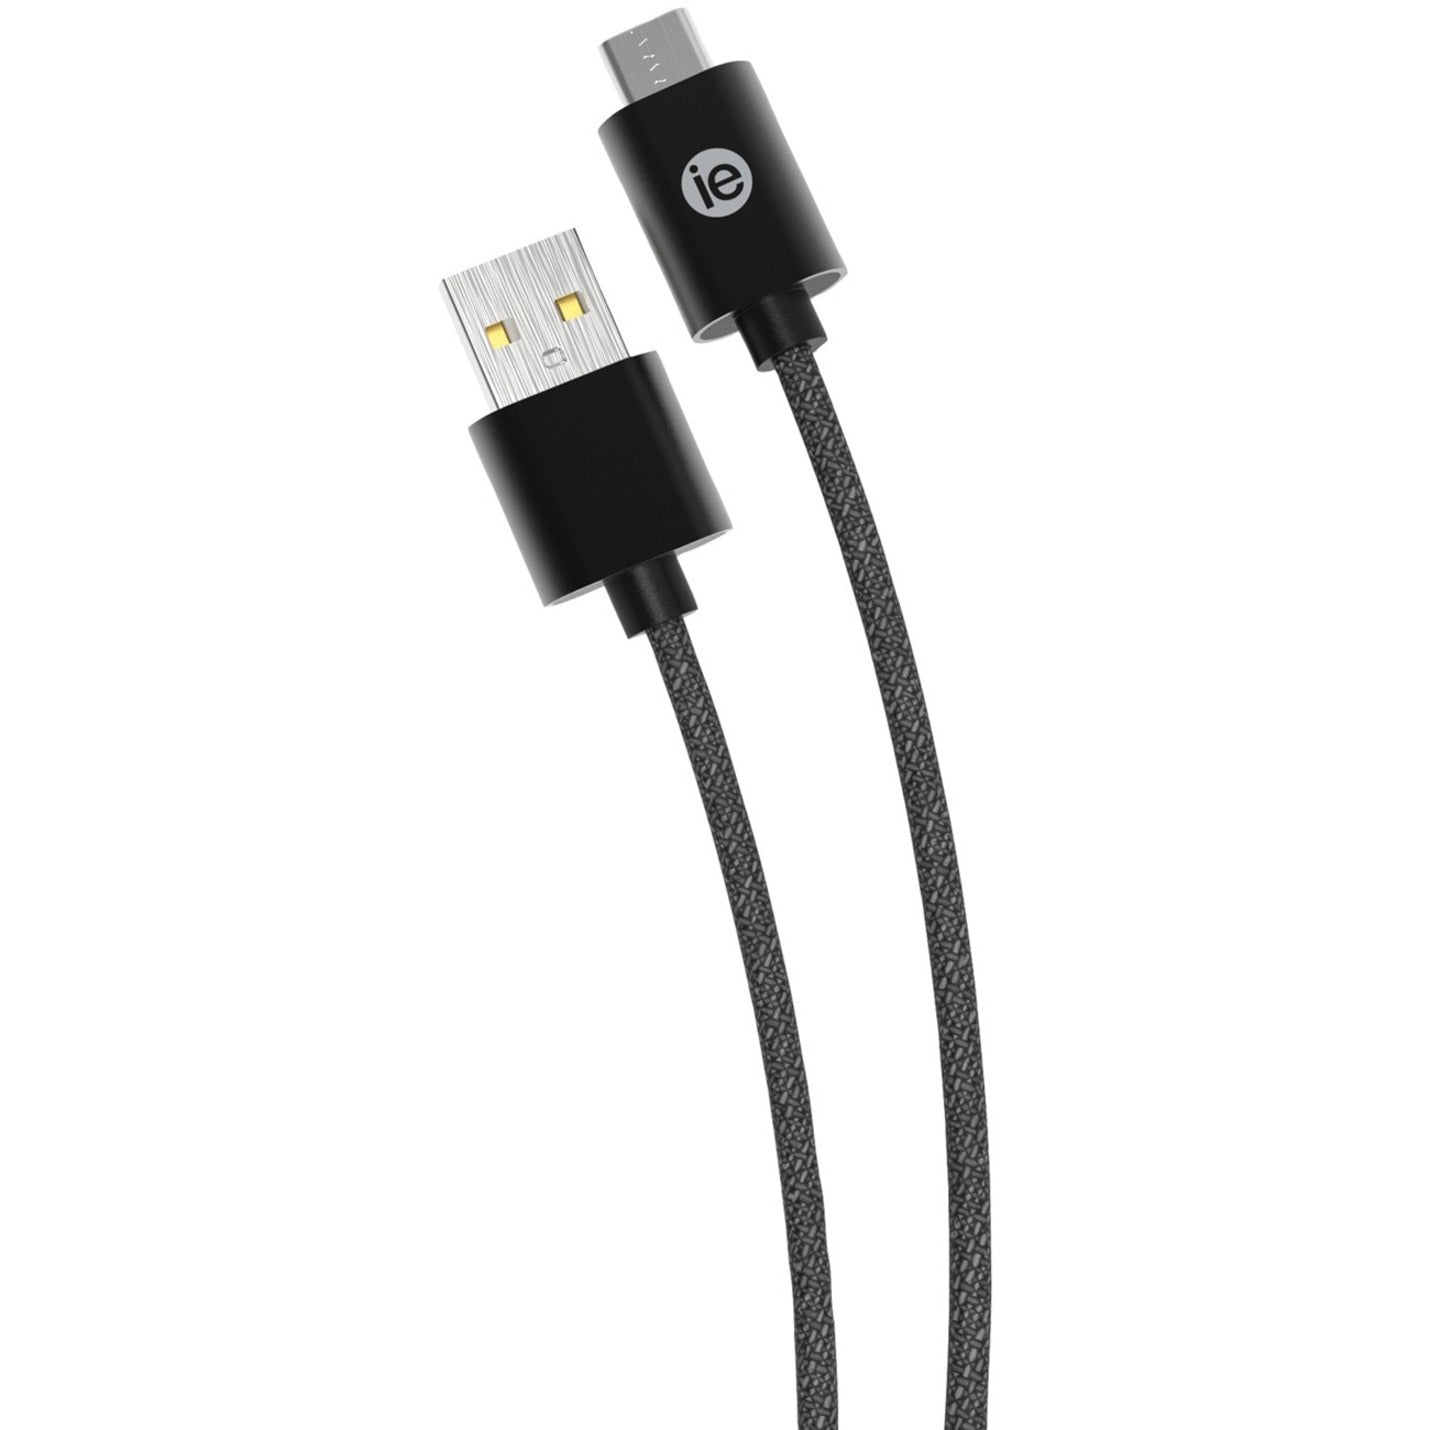 DigiPower IEN-BC10C-BK USB Data Transfer Cable, 10ft Braided USB-C to USB A Cable, Black